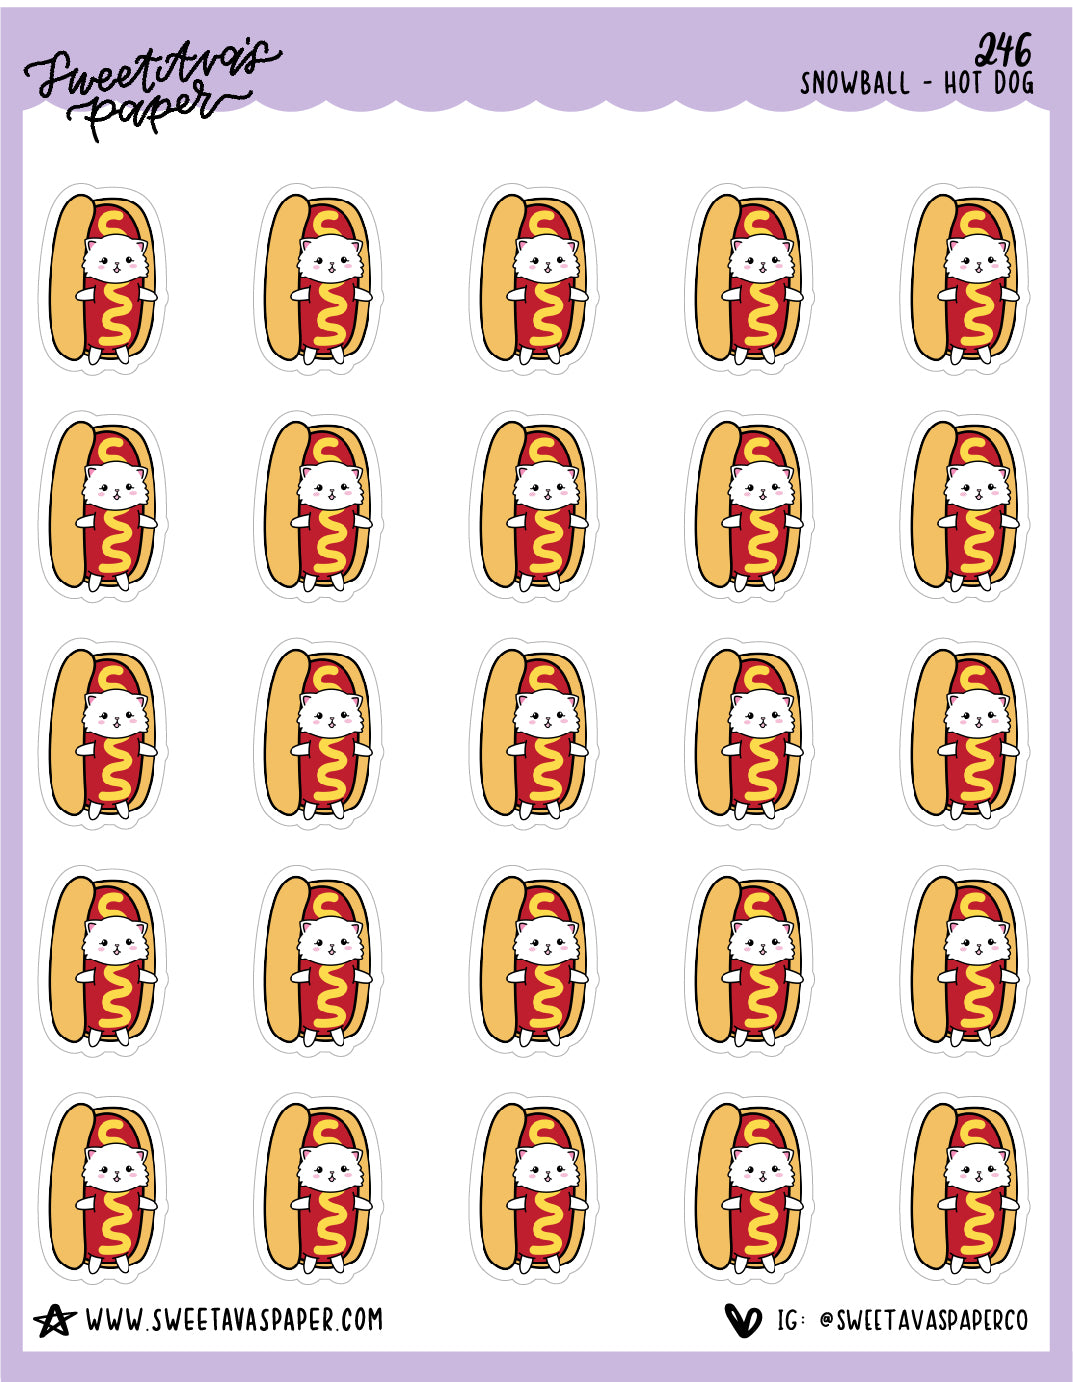 Hot Dog Stickers - Snowball The Cat - [246]